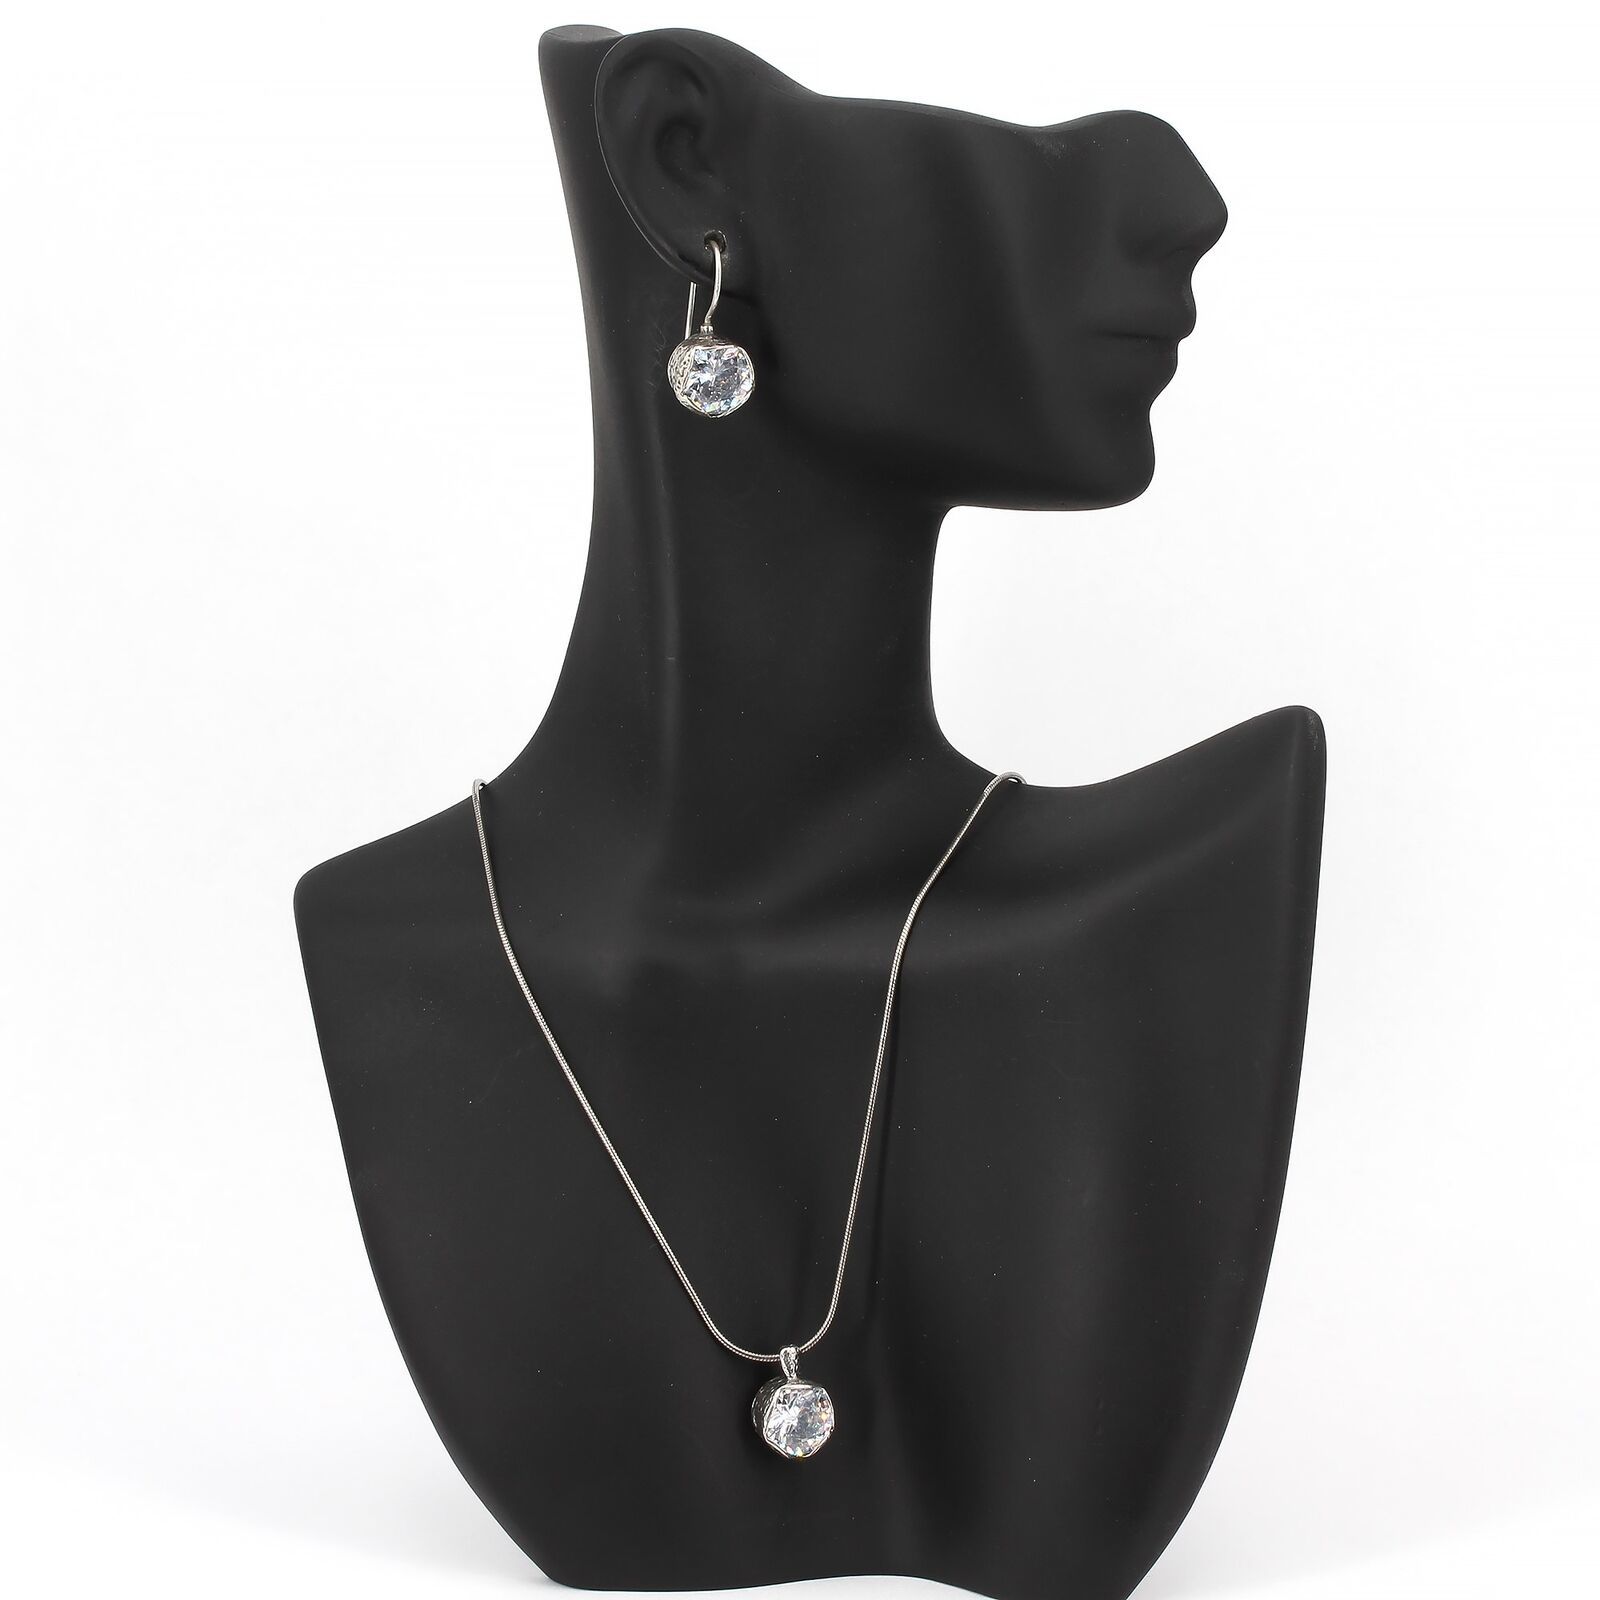 Primary image for Silpada Sterling CZ CENTER STAGE Necklace & CINEMA STAR Earrings Set N2380 W2393